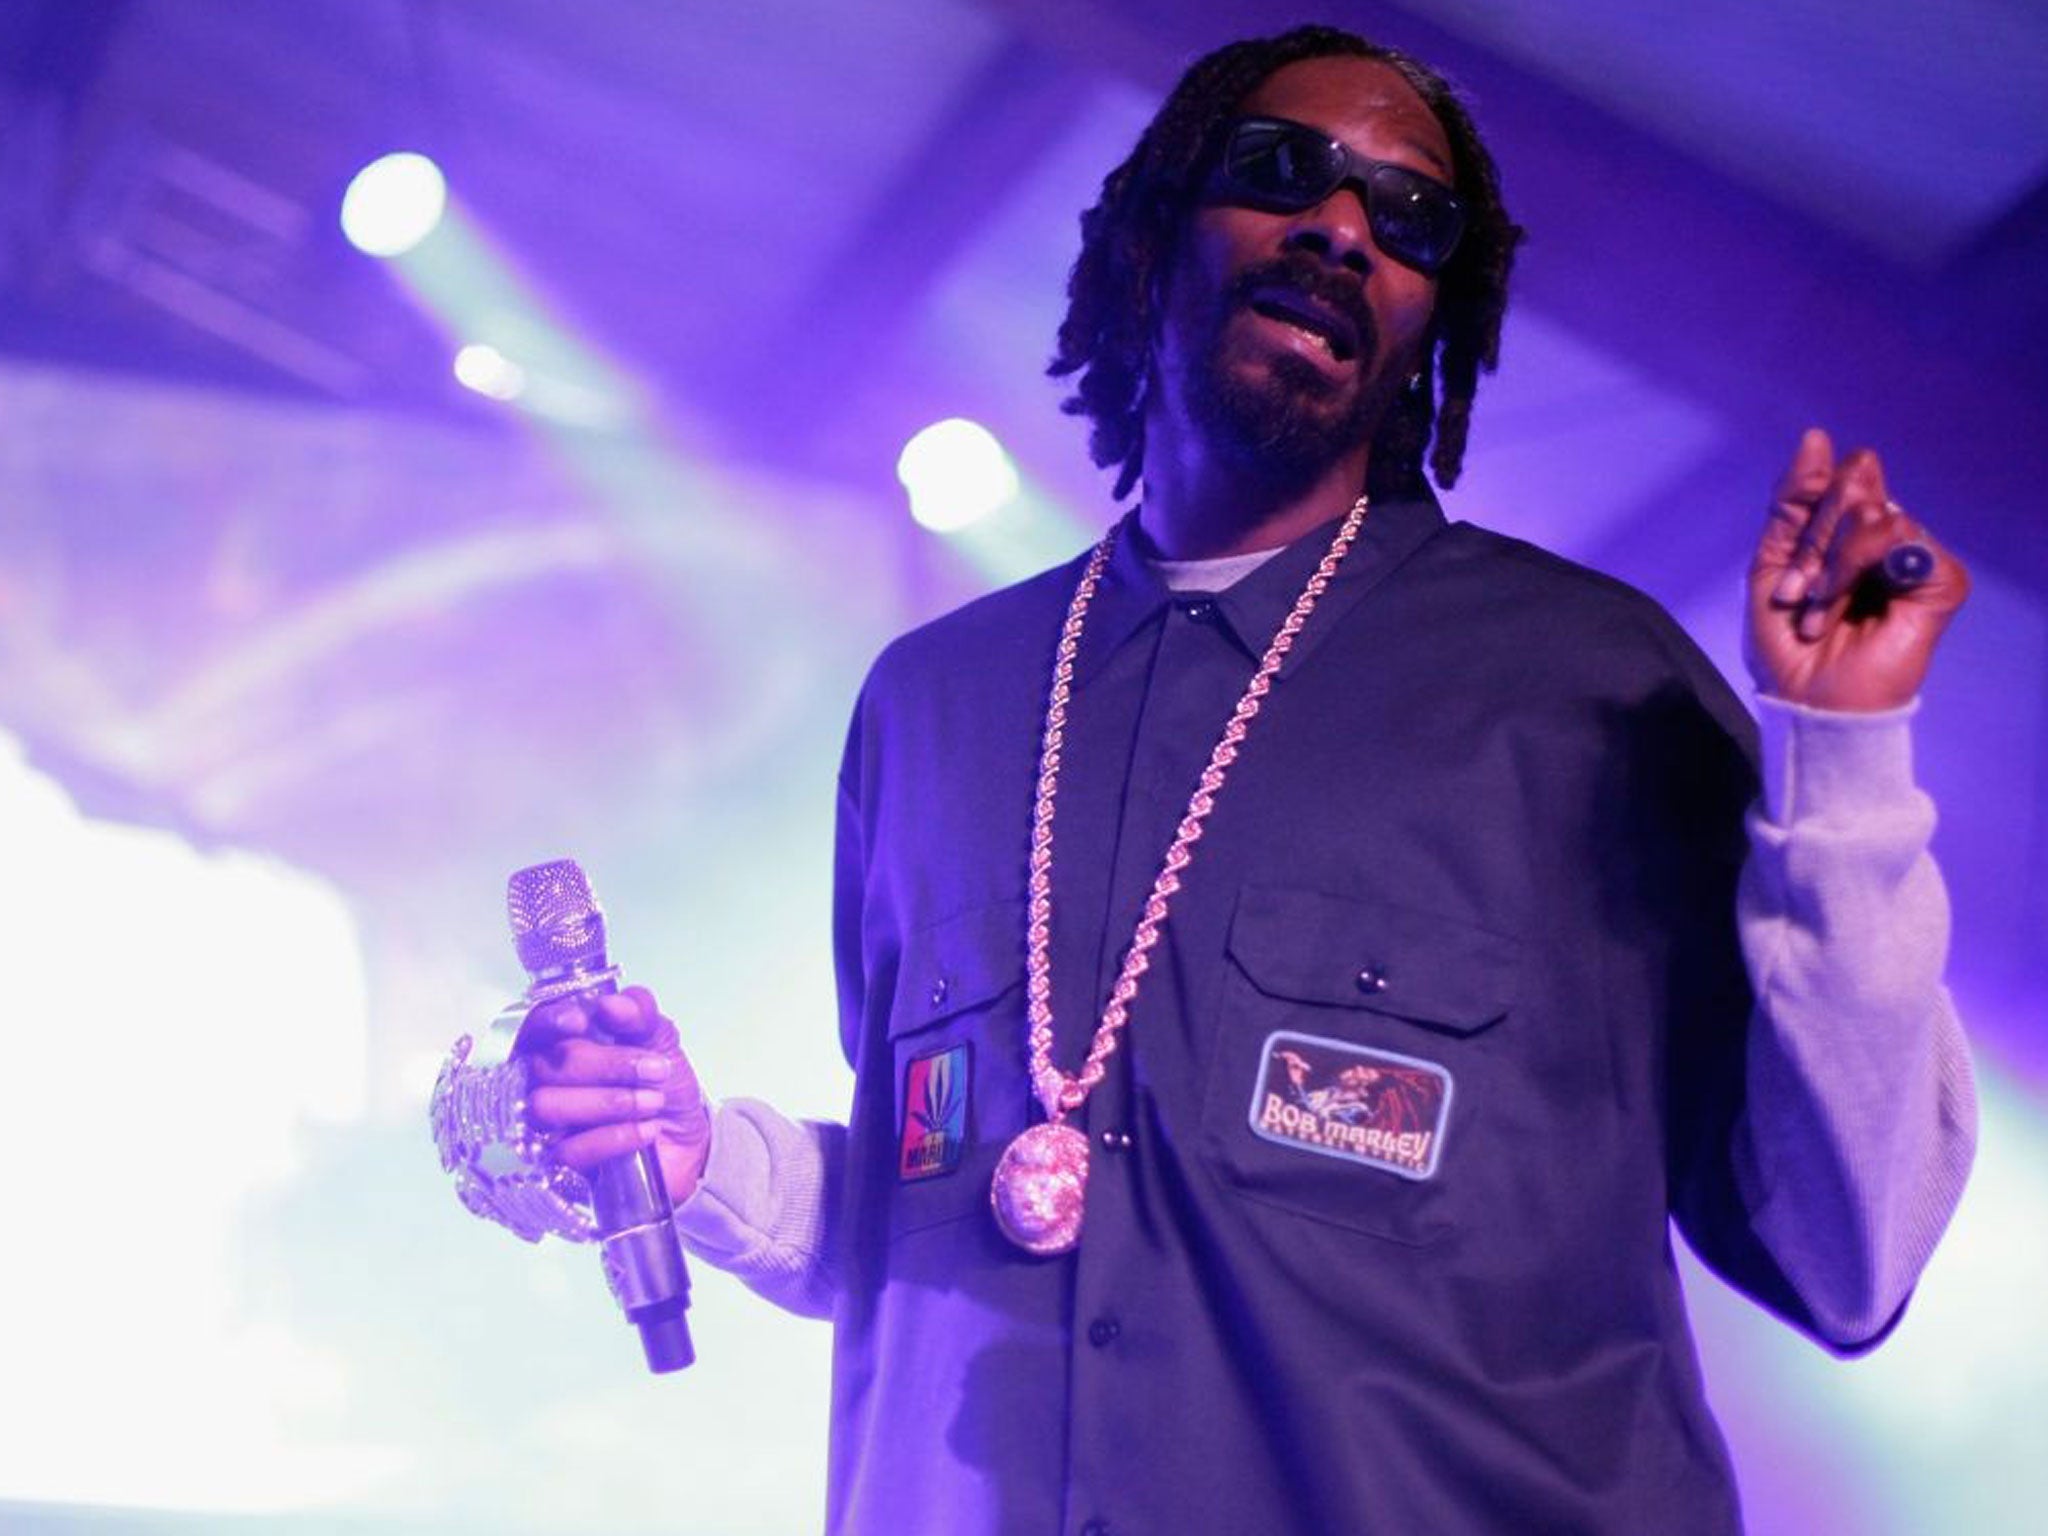 Do you cost as much as Snoop Dogg? Facebook will decide that